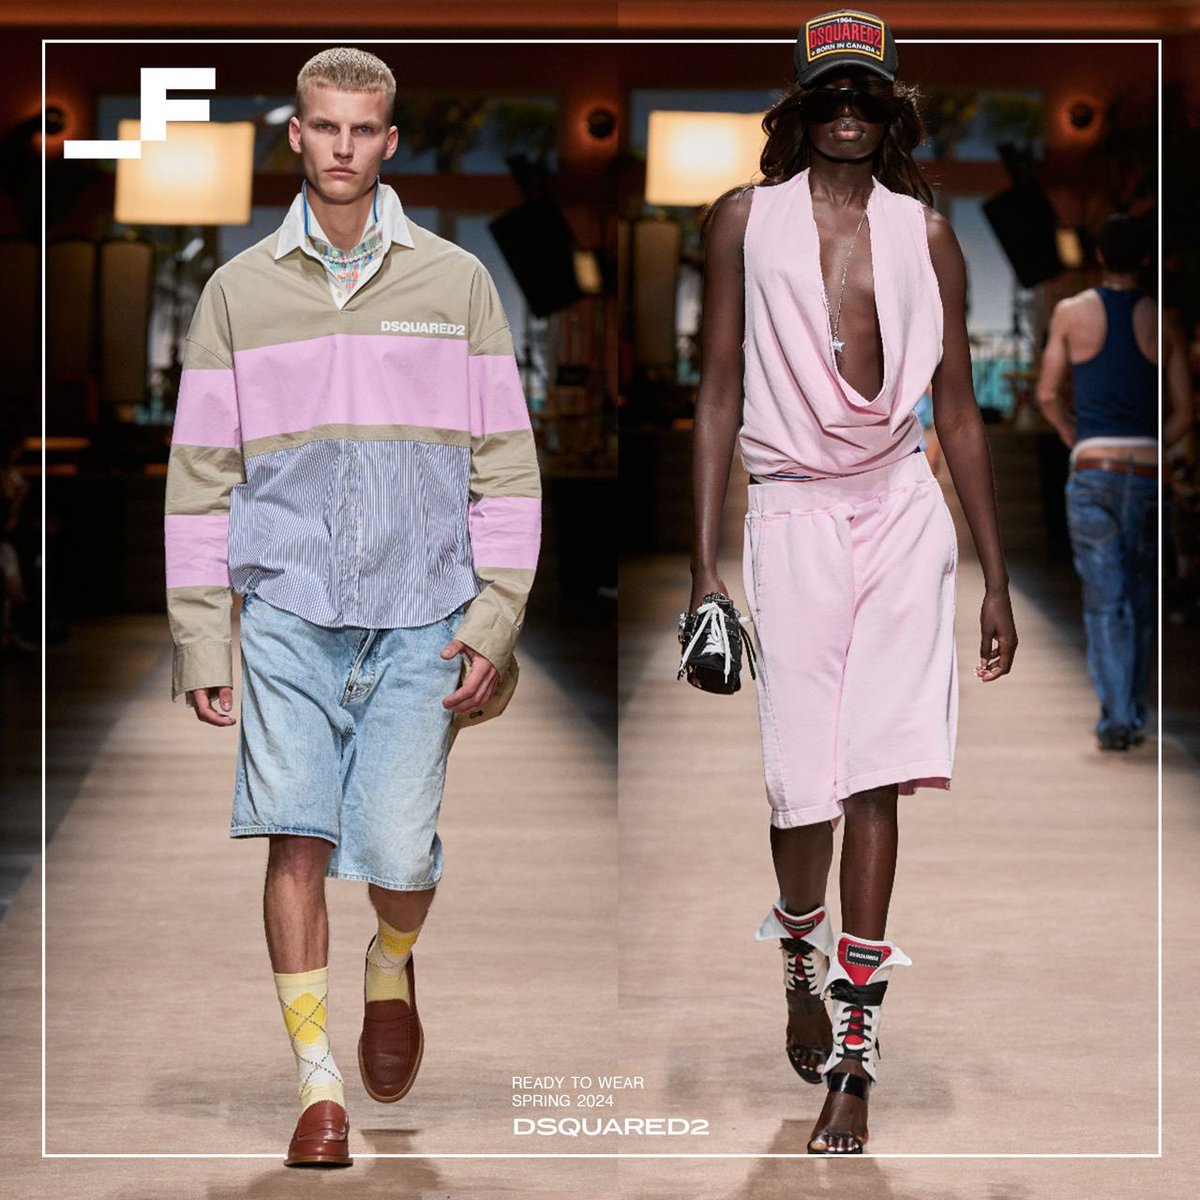 Second, the #Dsquared2 with its #D2naughty #readytowear readiness to play with timely looks. Bringing out their #archival references, bringing you the #preppy and the #sexy. It was not just the #runway, but a full blown #entertainment set. Go big or go home is so #Y2K right?